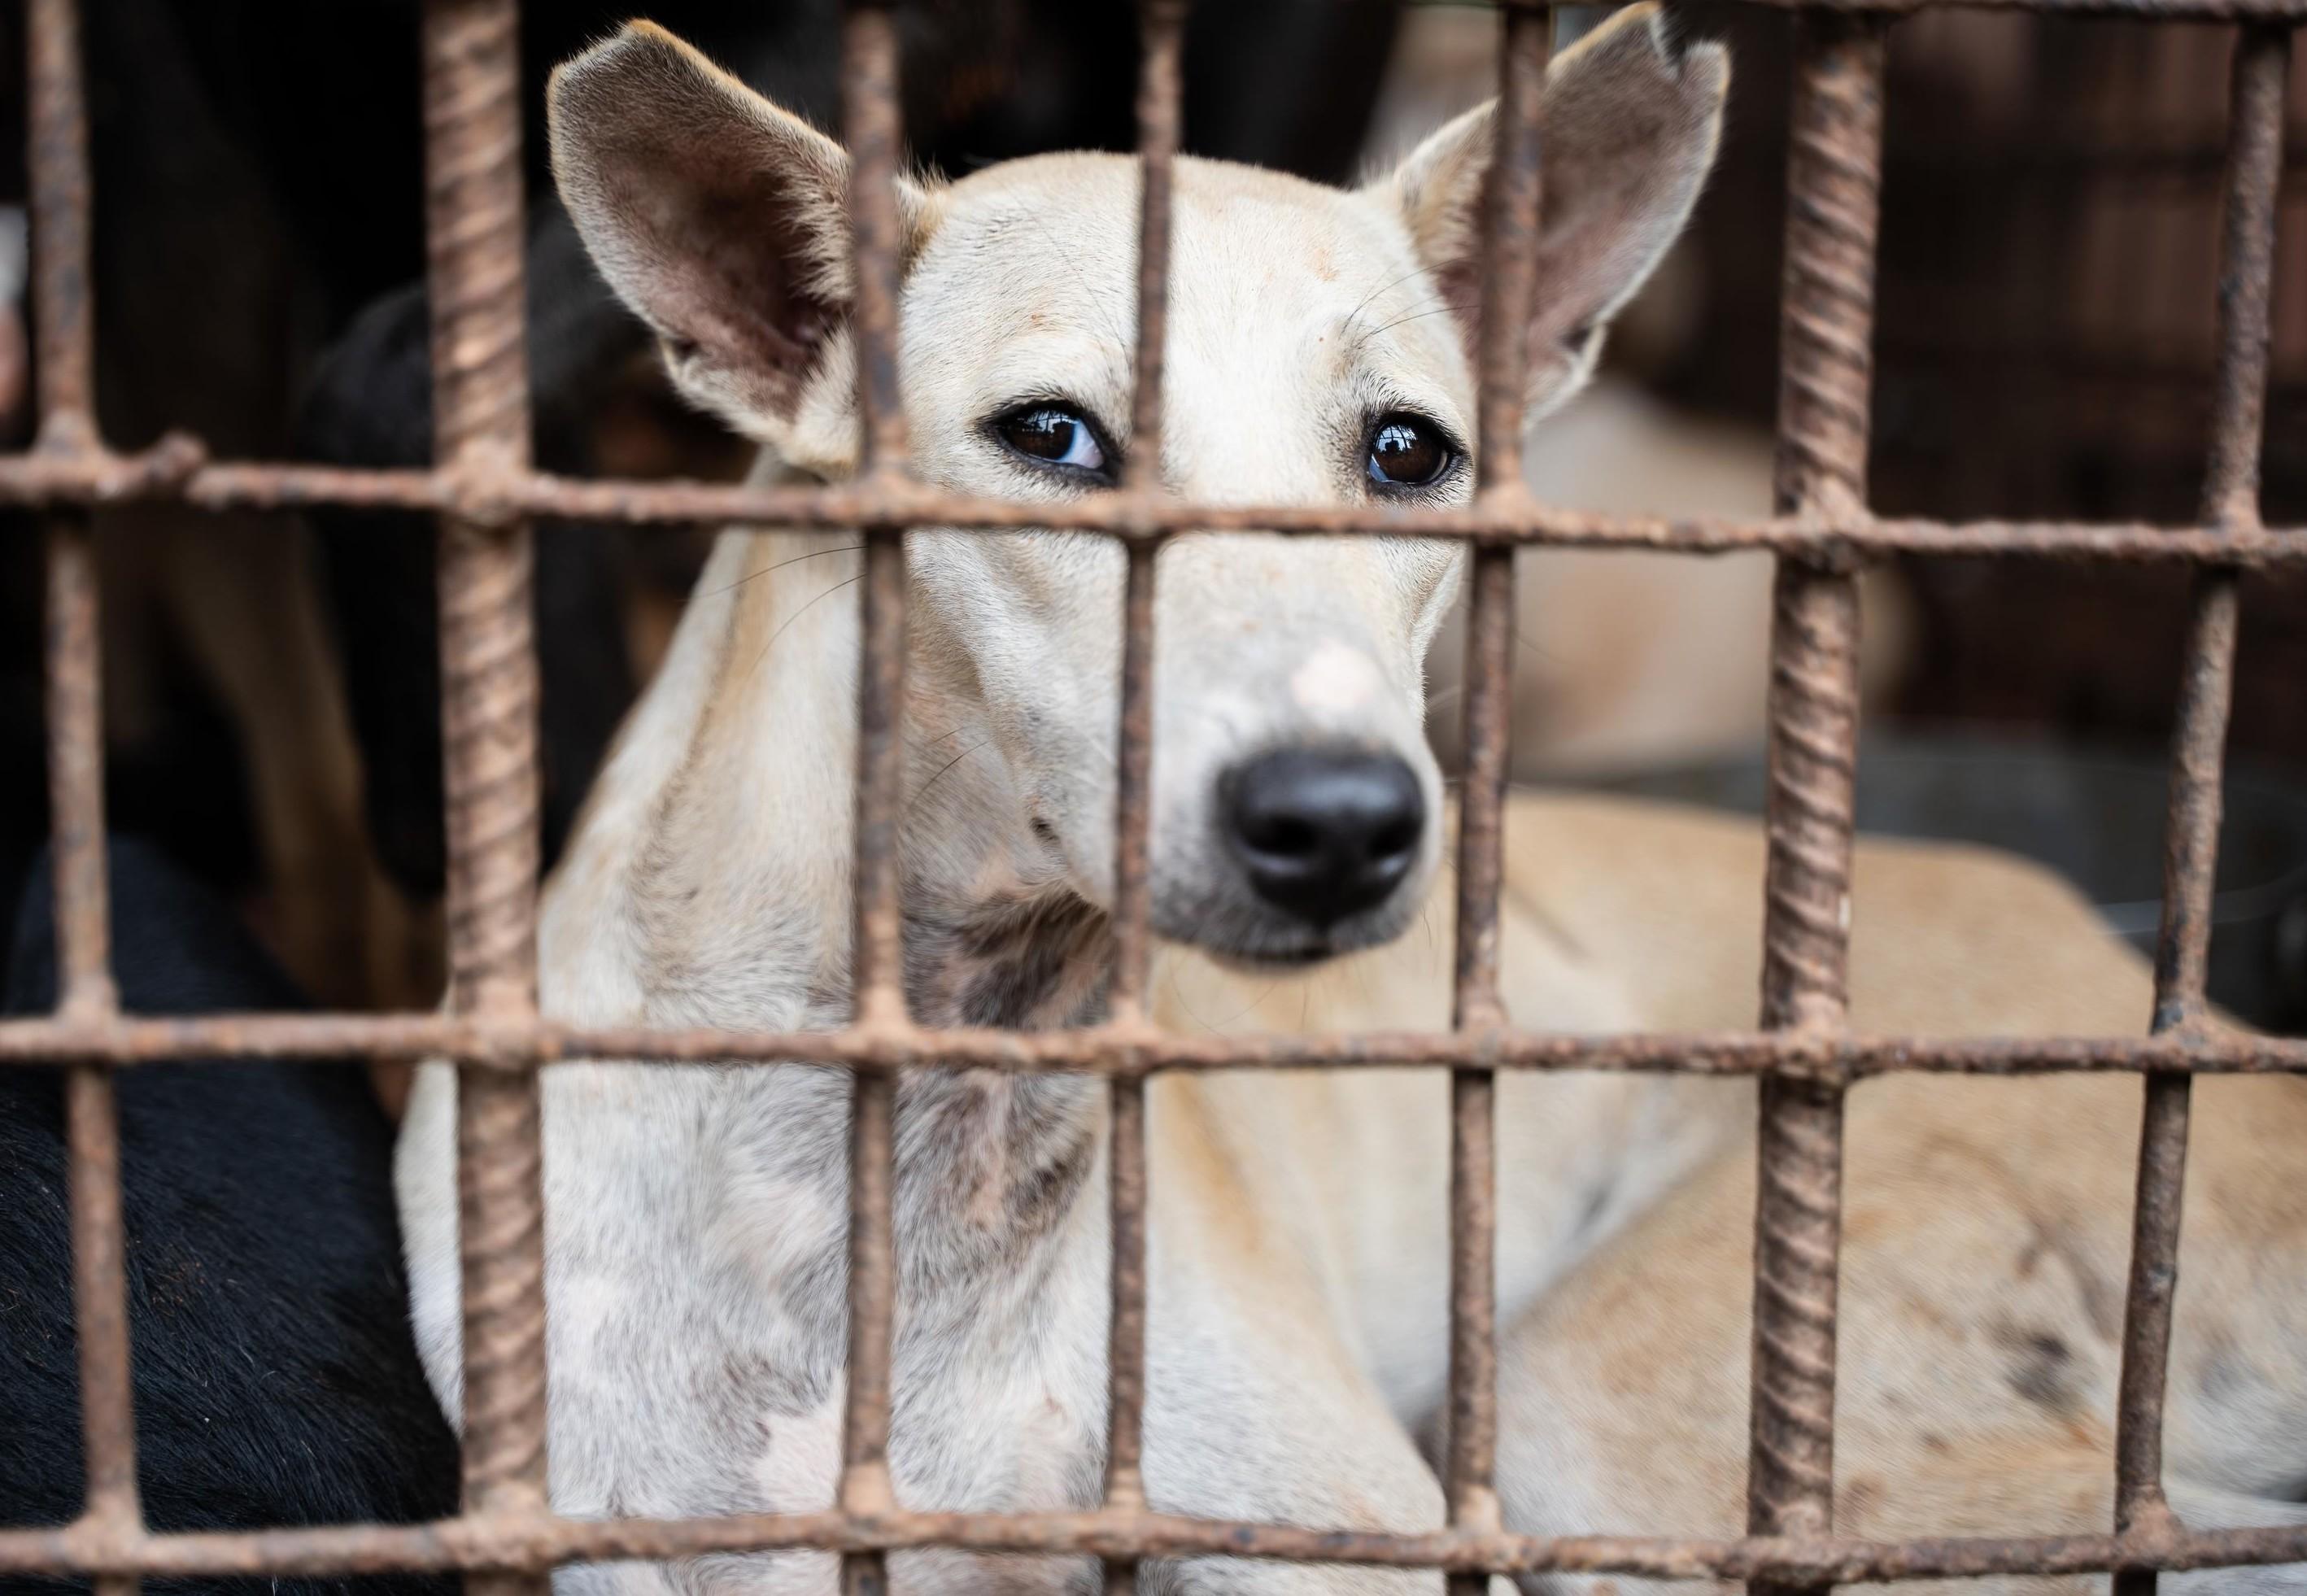 FOUR PAWS shuts down dog slaughterhouse in Cambodia critical to the trade -  FOUR PAWS in US - Global Animal Protection Organization